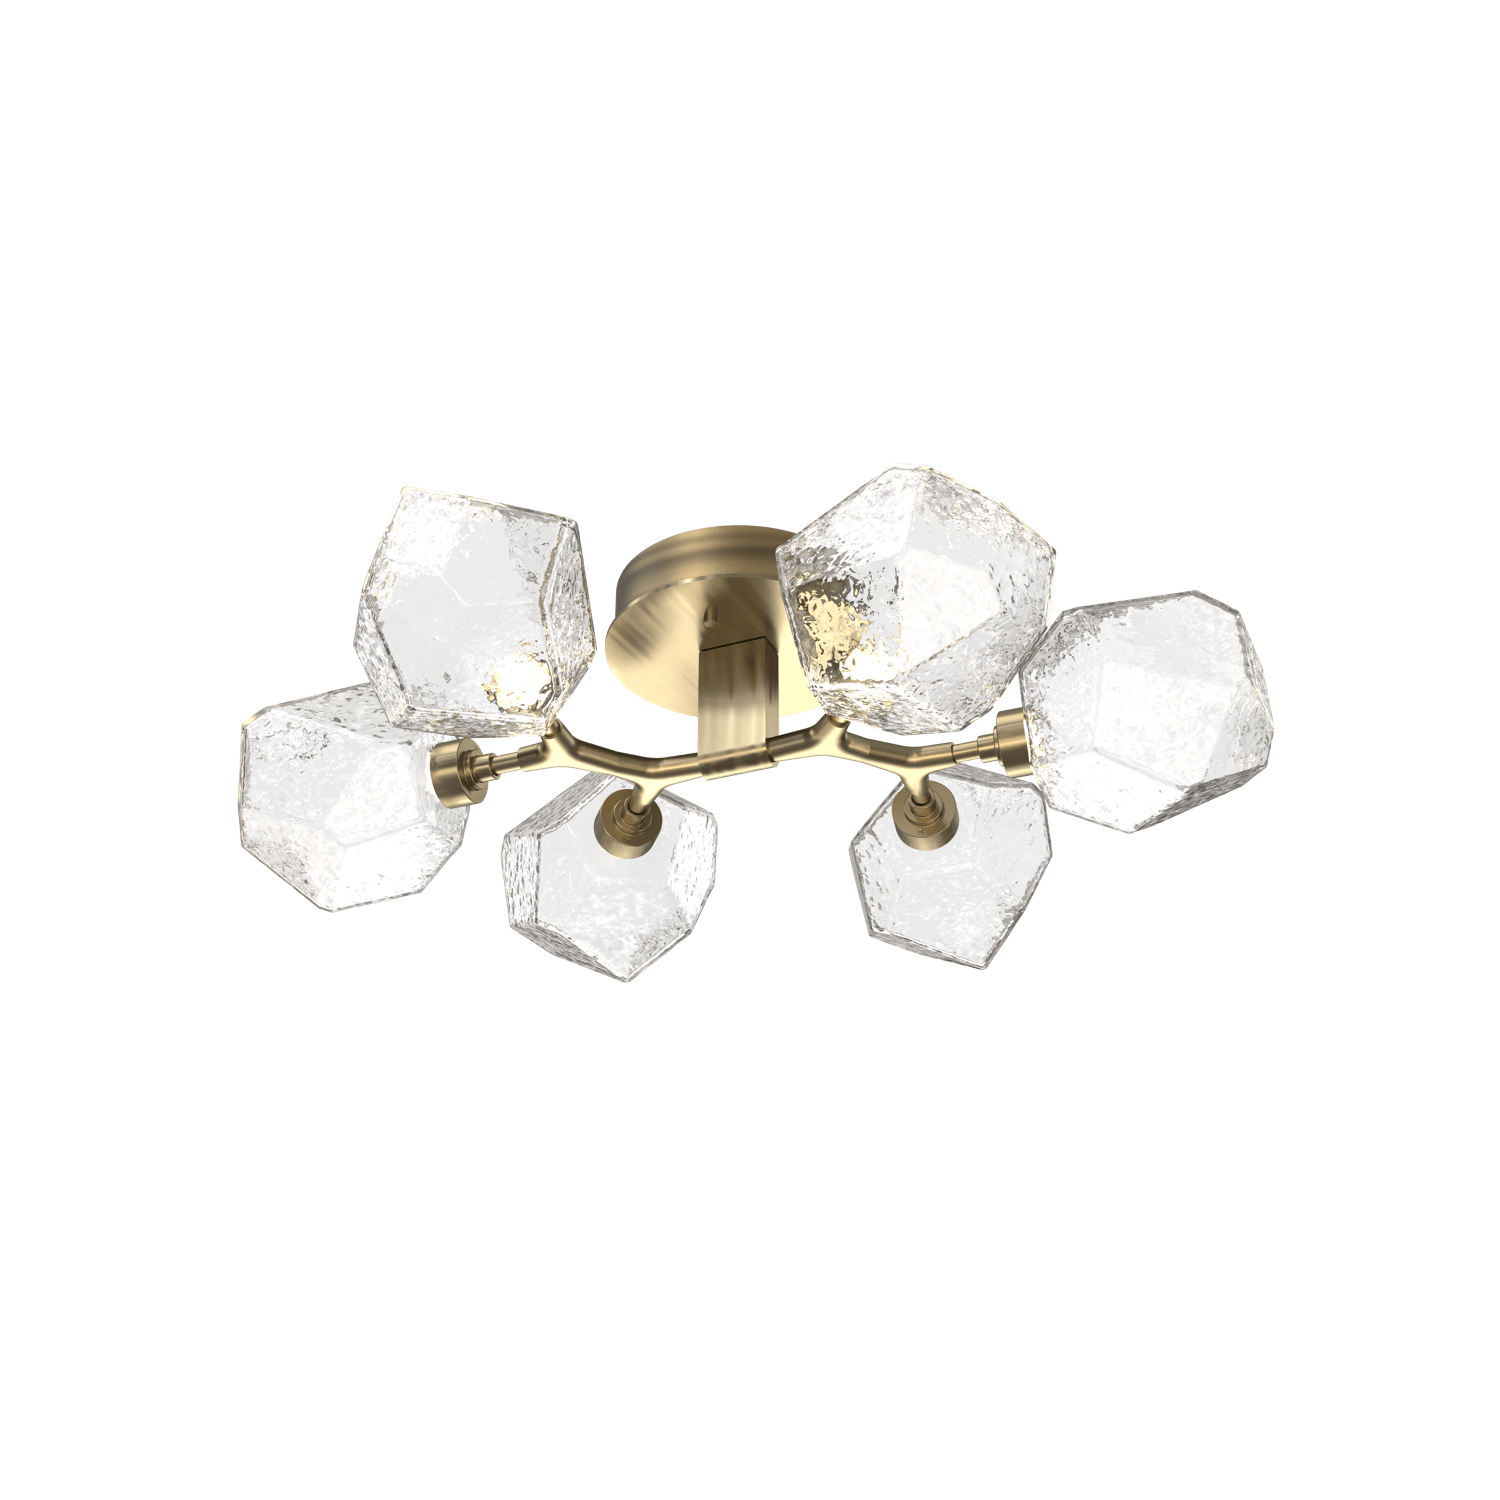 CLB0039-01-HB-C-Hammerton-Studio-Gem-6-light-organic-flush-mount-light-with-heritage-brass-finish-and-clear-blown-glass-shades-and-LED-lamping